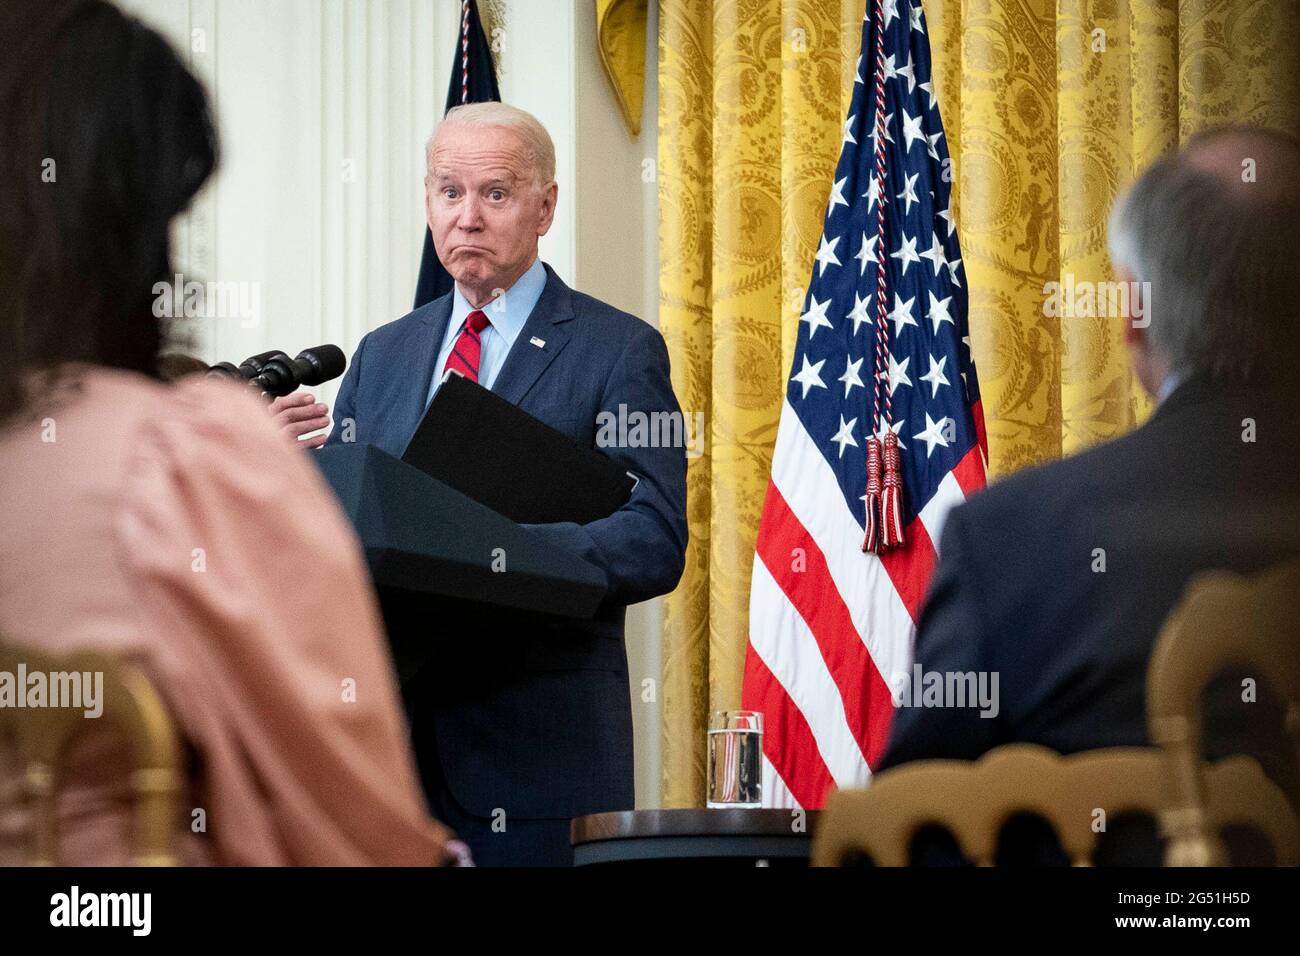 President Joe Biden delivers remarks on deals made with Senators on a bipartisan infrastructure plan in the East Room of the White House in Washington, DC, on Thursday, June 24, 2021. Credit: Sarah Silbiger/Pool via CNP /MediaPunch Stock Photo